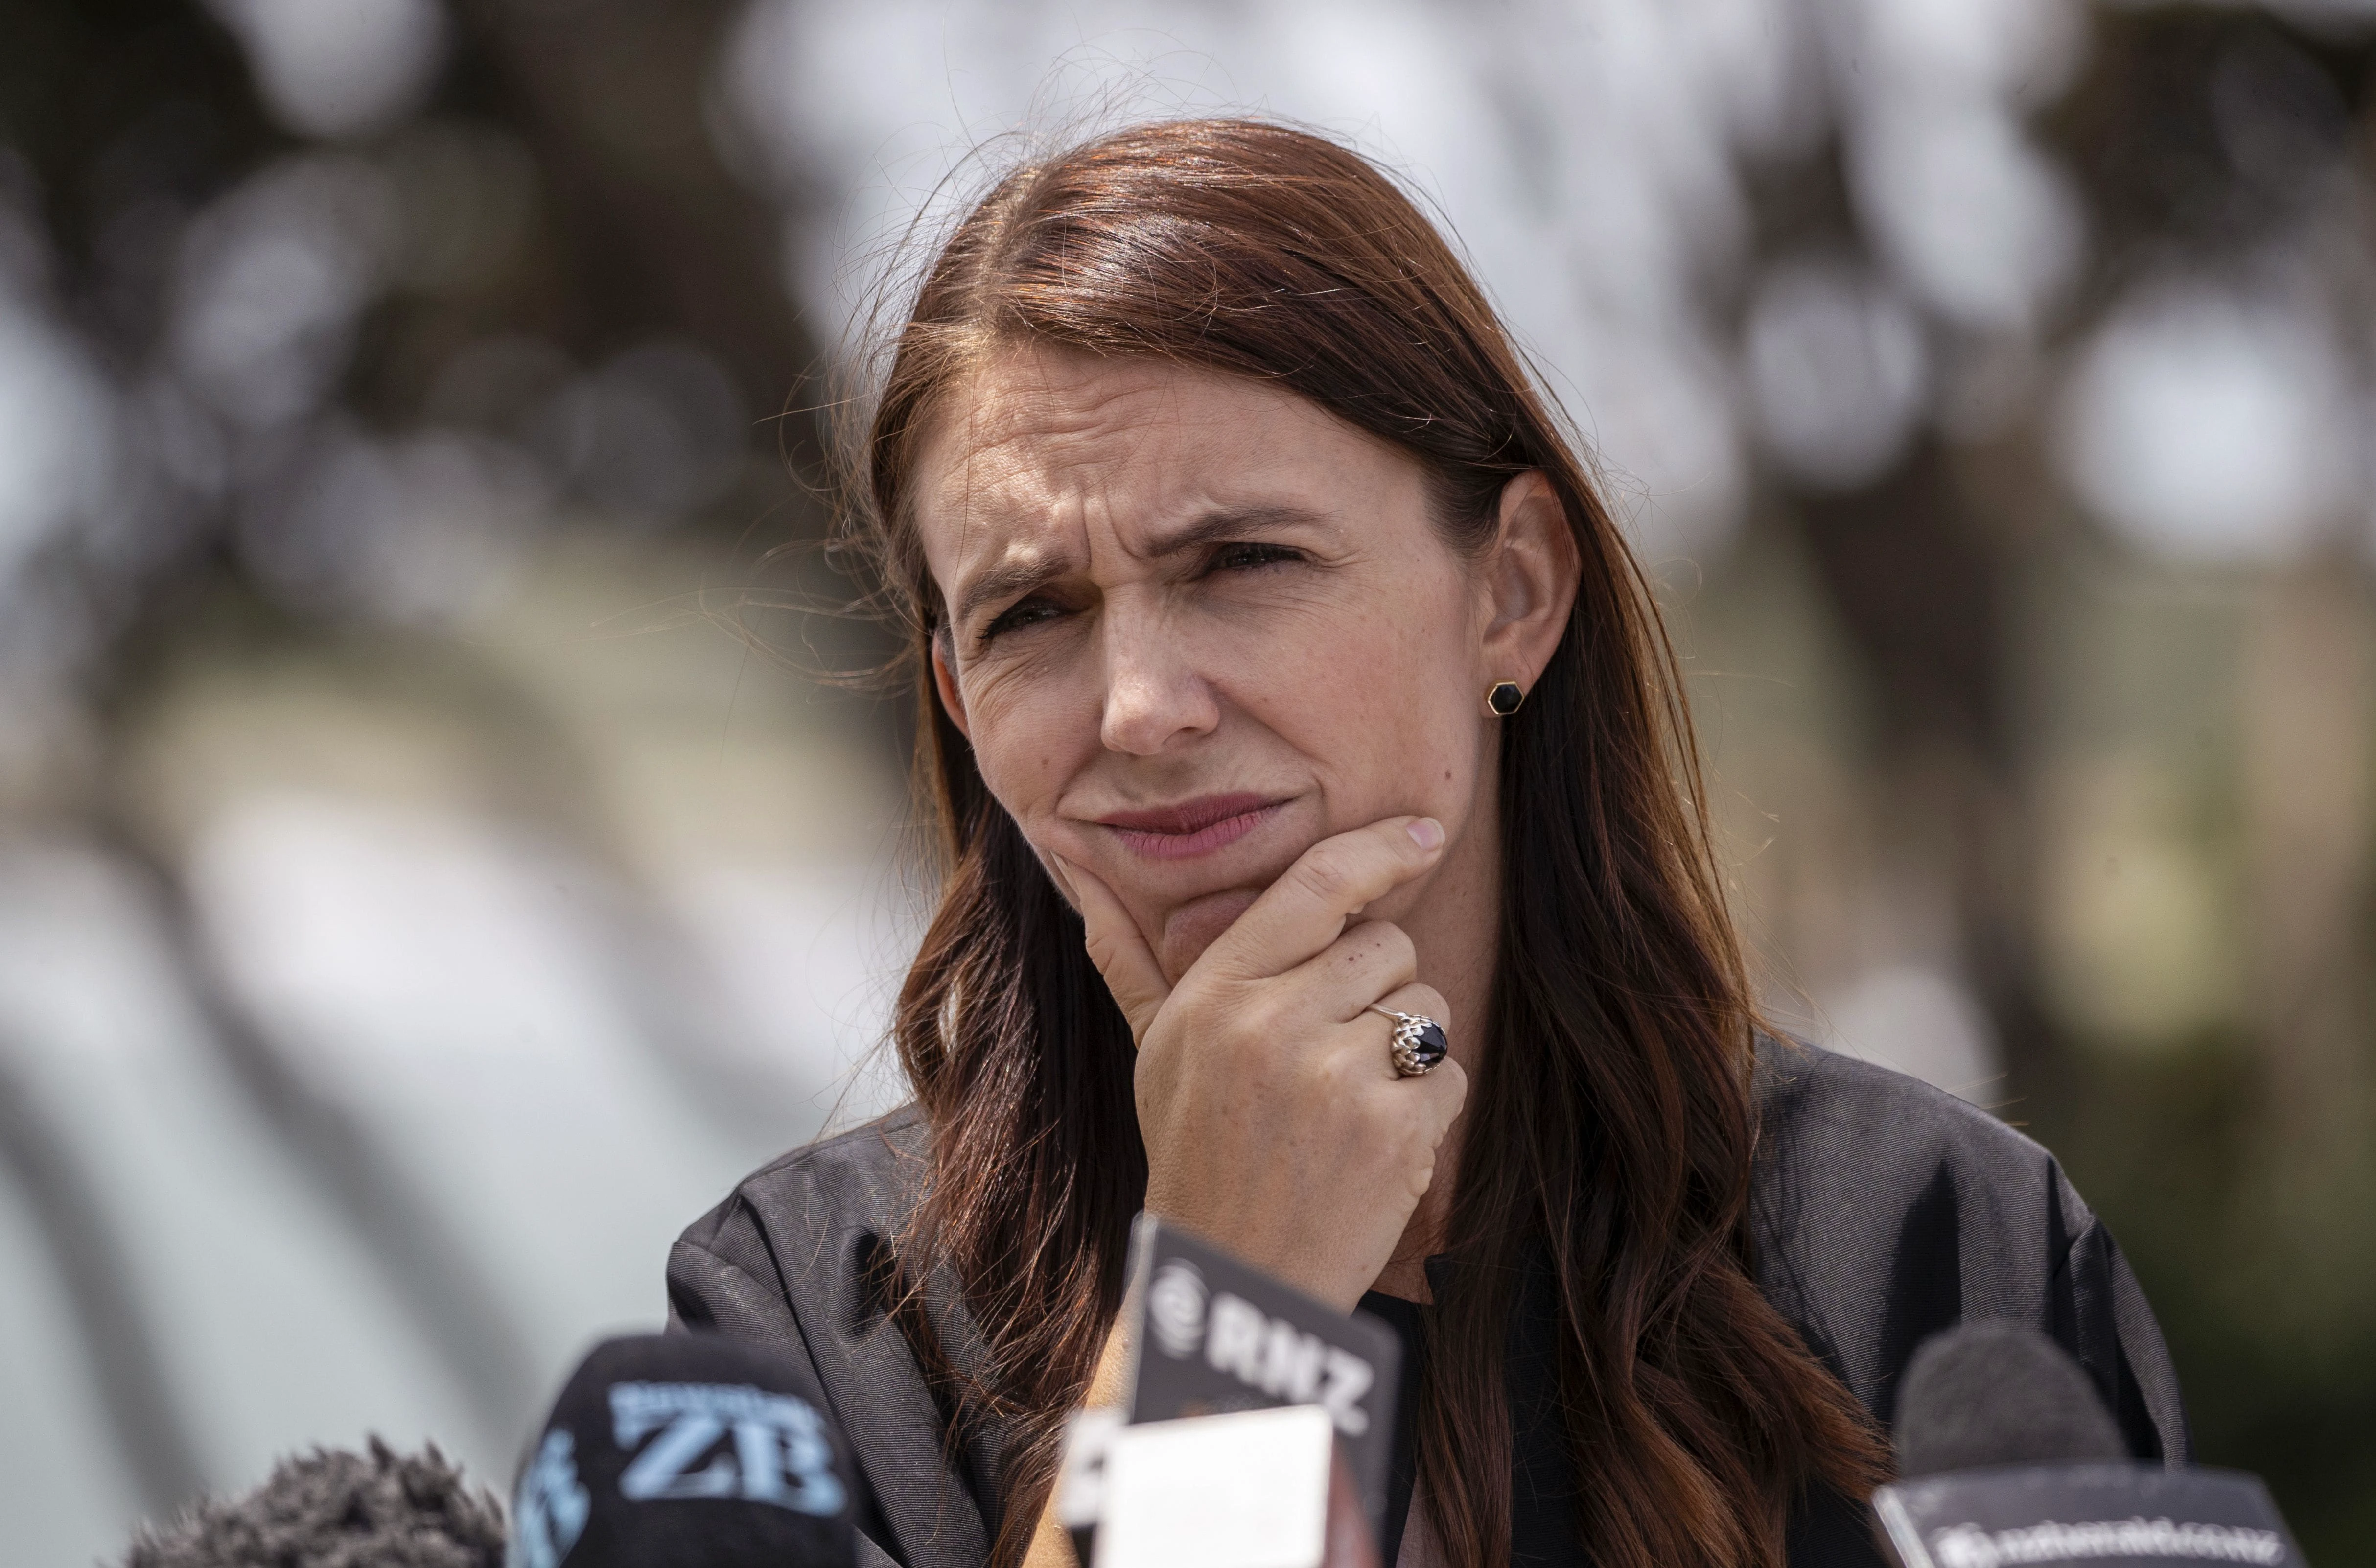 New Zealand PM Jacinda Ardern Cancels Her Wedding Amid New COVID Restrictions as Omicron Spreads